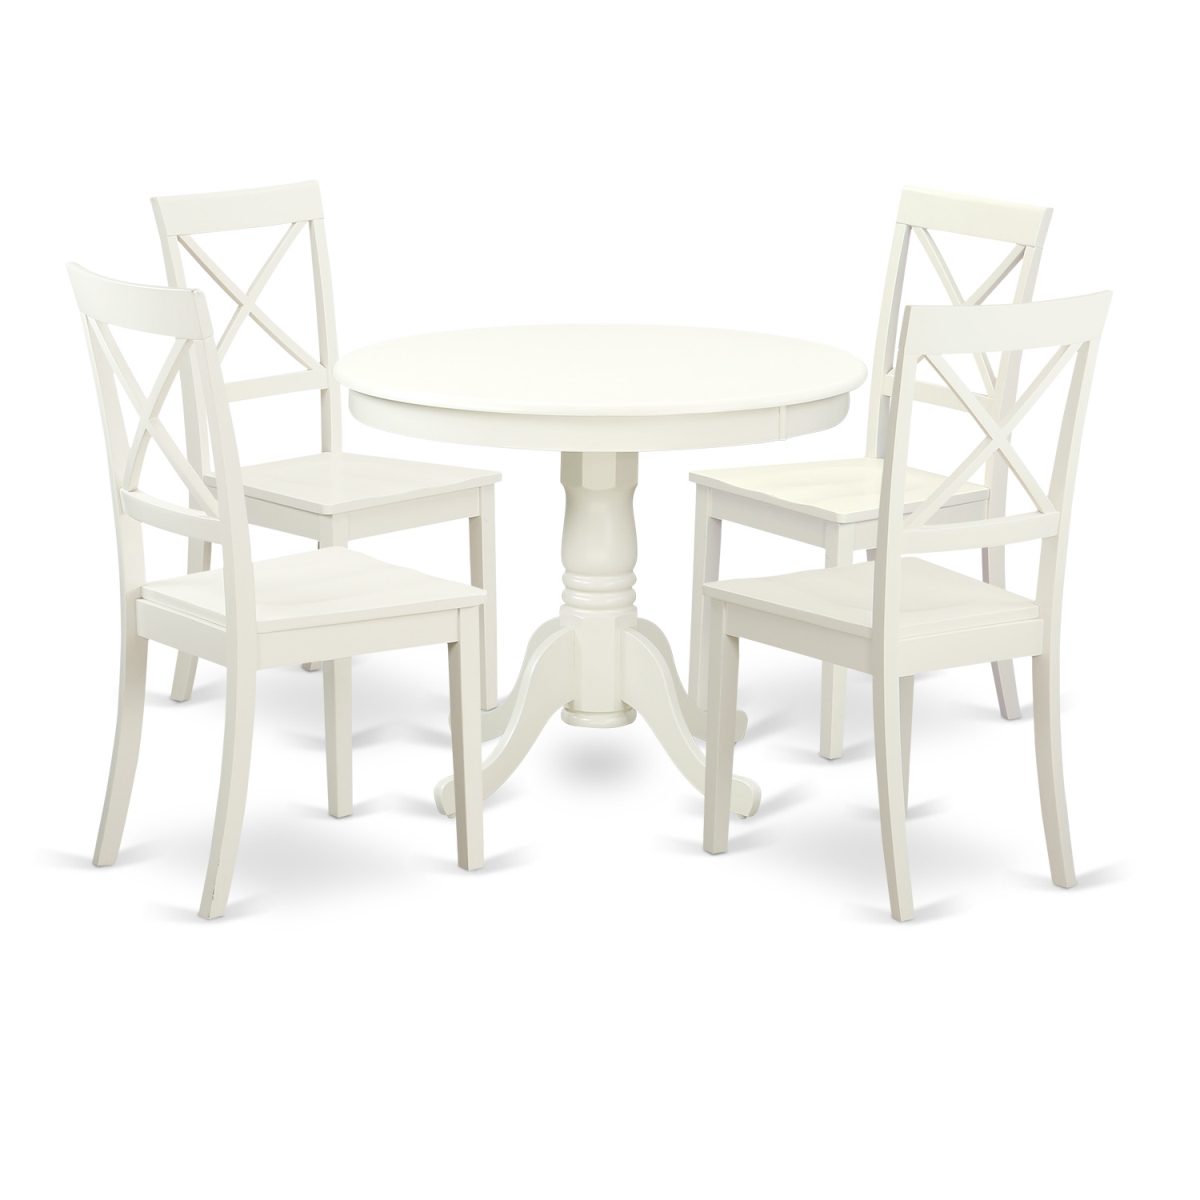 Picture of East West Furniture ANBO5-LWH-W Dining Set - One Table & Four Wood Seat Chairs, Linen White - 5 Piece